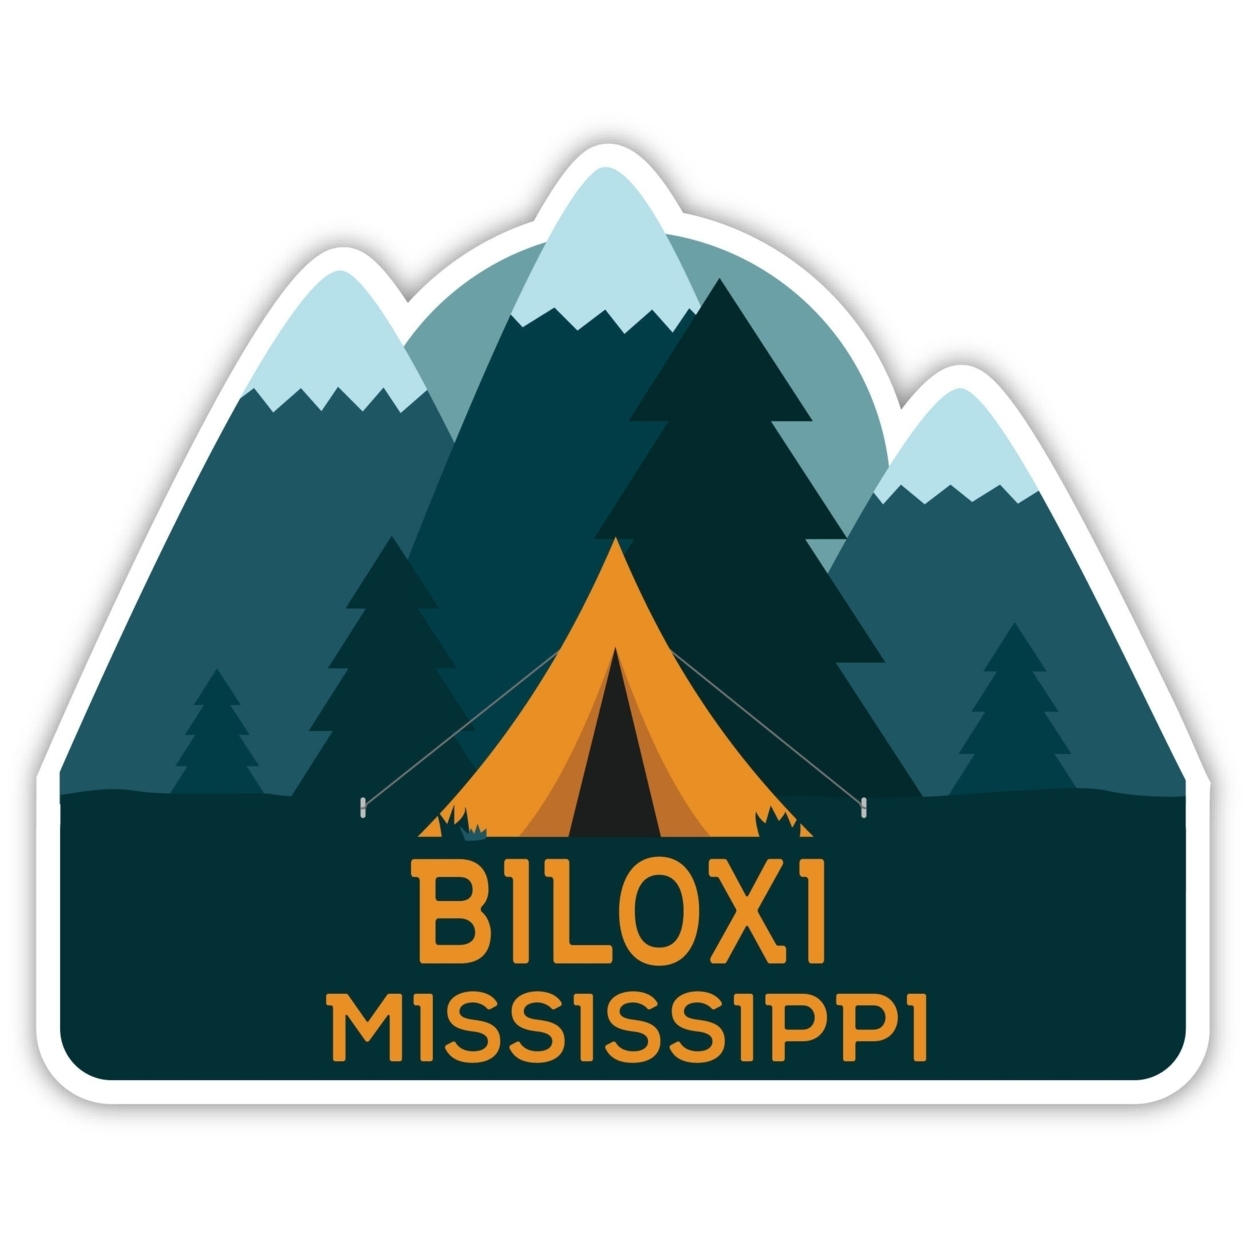 Biloxi Mississippi Souvenir Decorative Stickers (Choose Theme And Size) - 4-Pack, 4-Inch, Tent